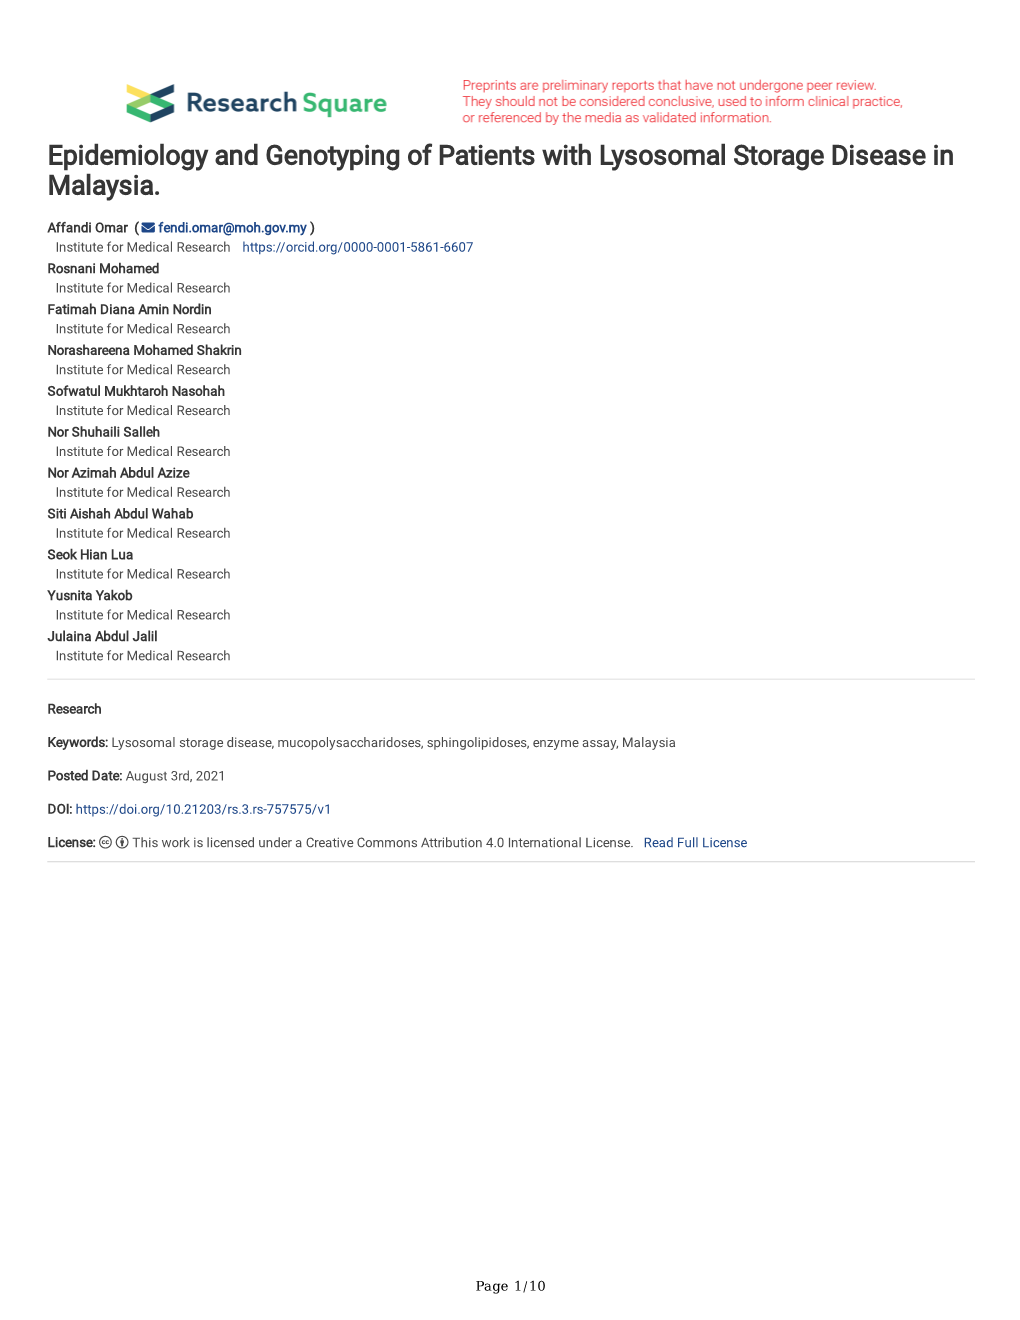 Epidemiology and Genotyping of Patients with Lysosomal Storage Disease in Malaysia